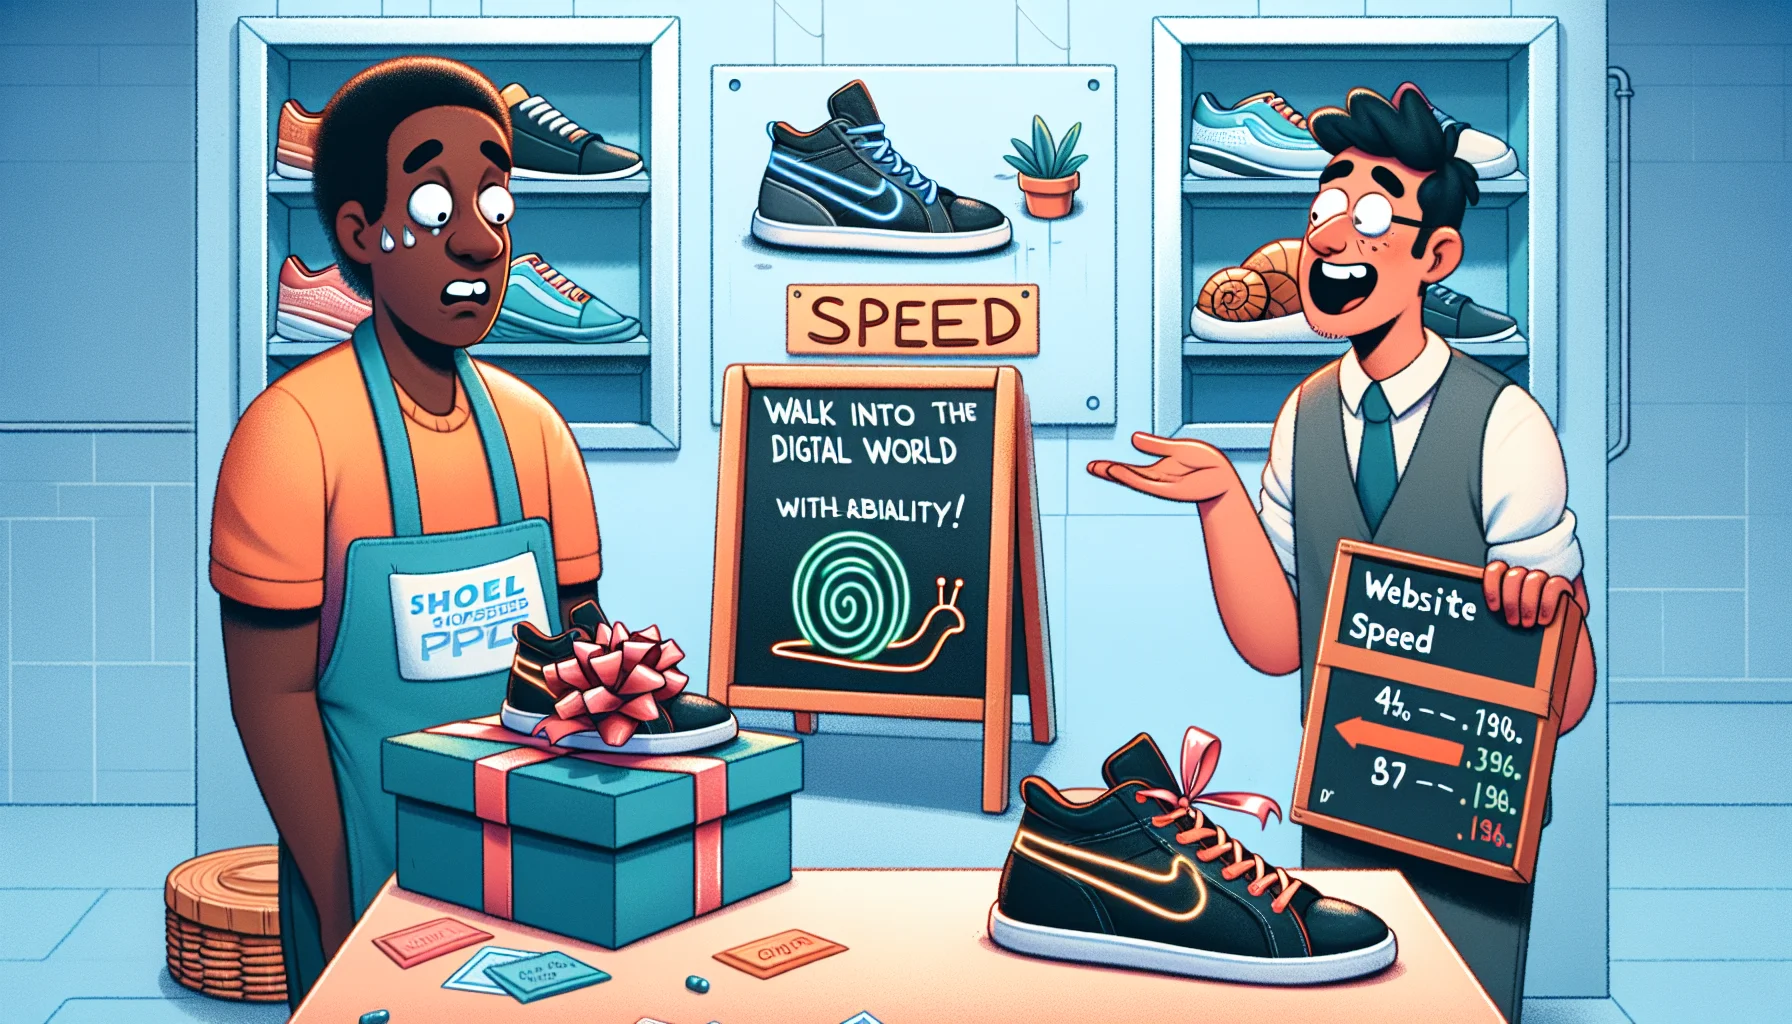 Depict a humorous scene in a shoe store. A pair of stylish shoes are gift-wrapped on the counter. They have neon tags that read 'Website Speed' and 'Reliability'. A puzzled shopkeeper of African descent and a laughing customer of Asian descent are both pointing at the shoes. In the background, a sign reads: 'Walk into the digital world with comfort!'. A chalkboard nearby humorously illustrates a pair of shoes outpacing a snail, symbolizing high-speed website hosting.